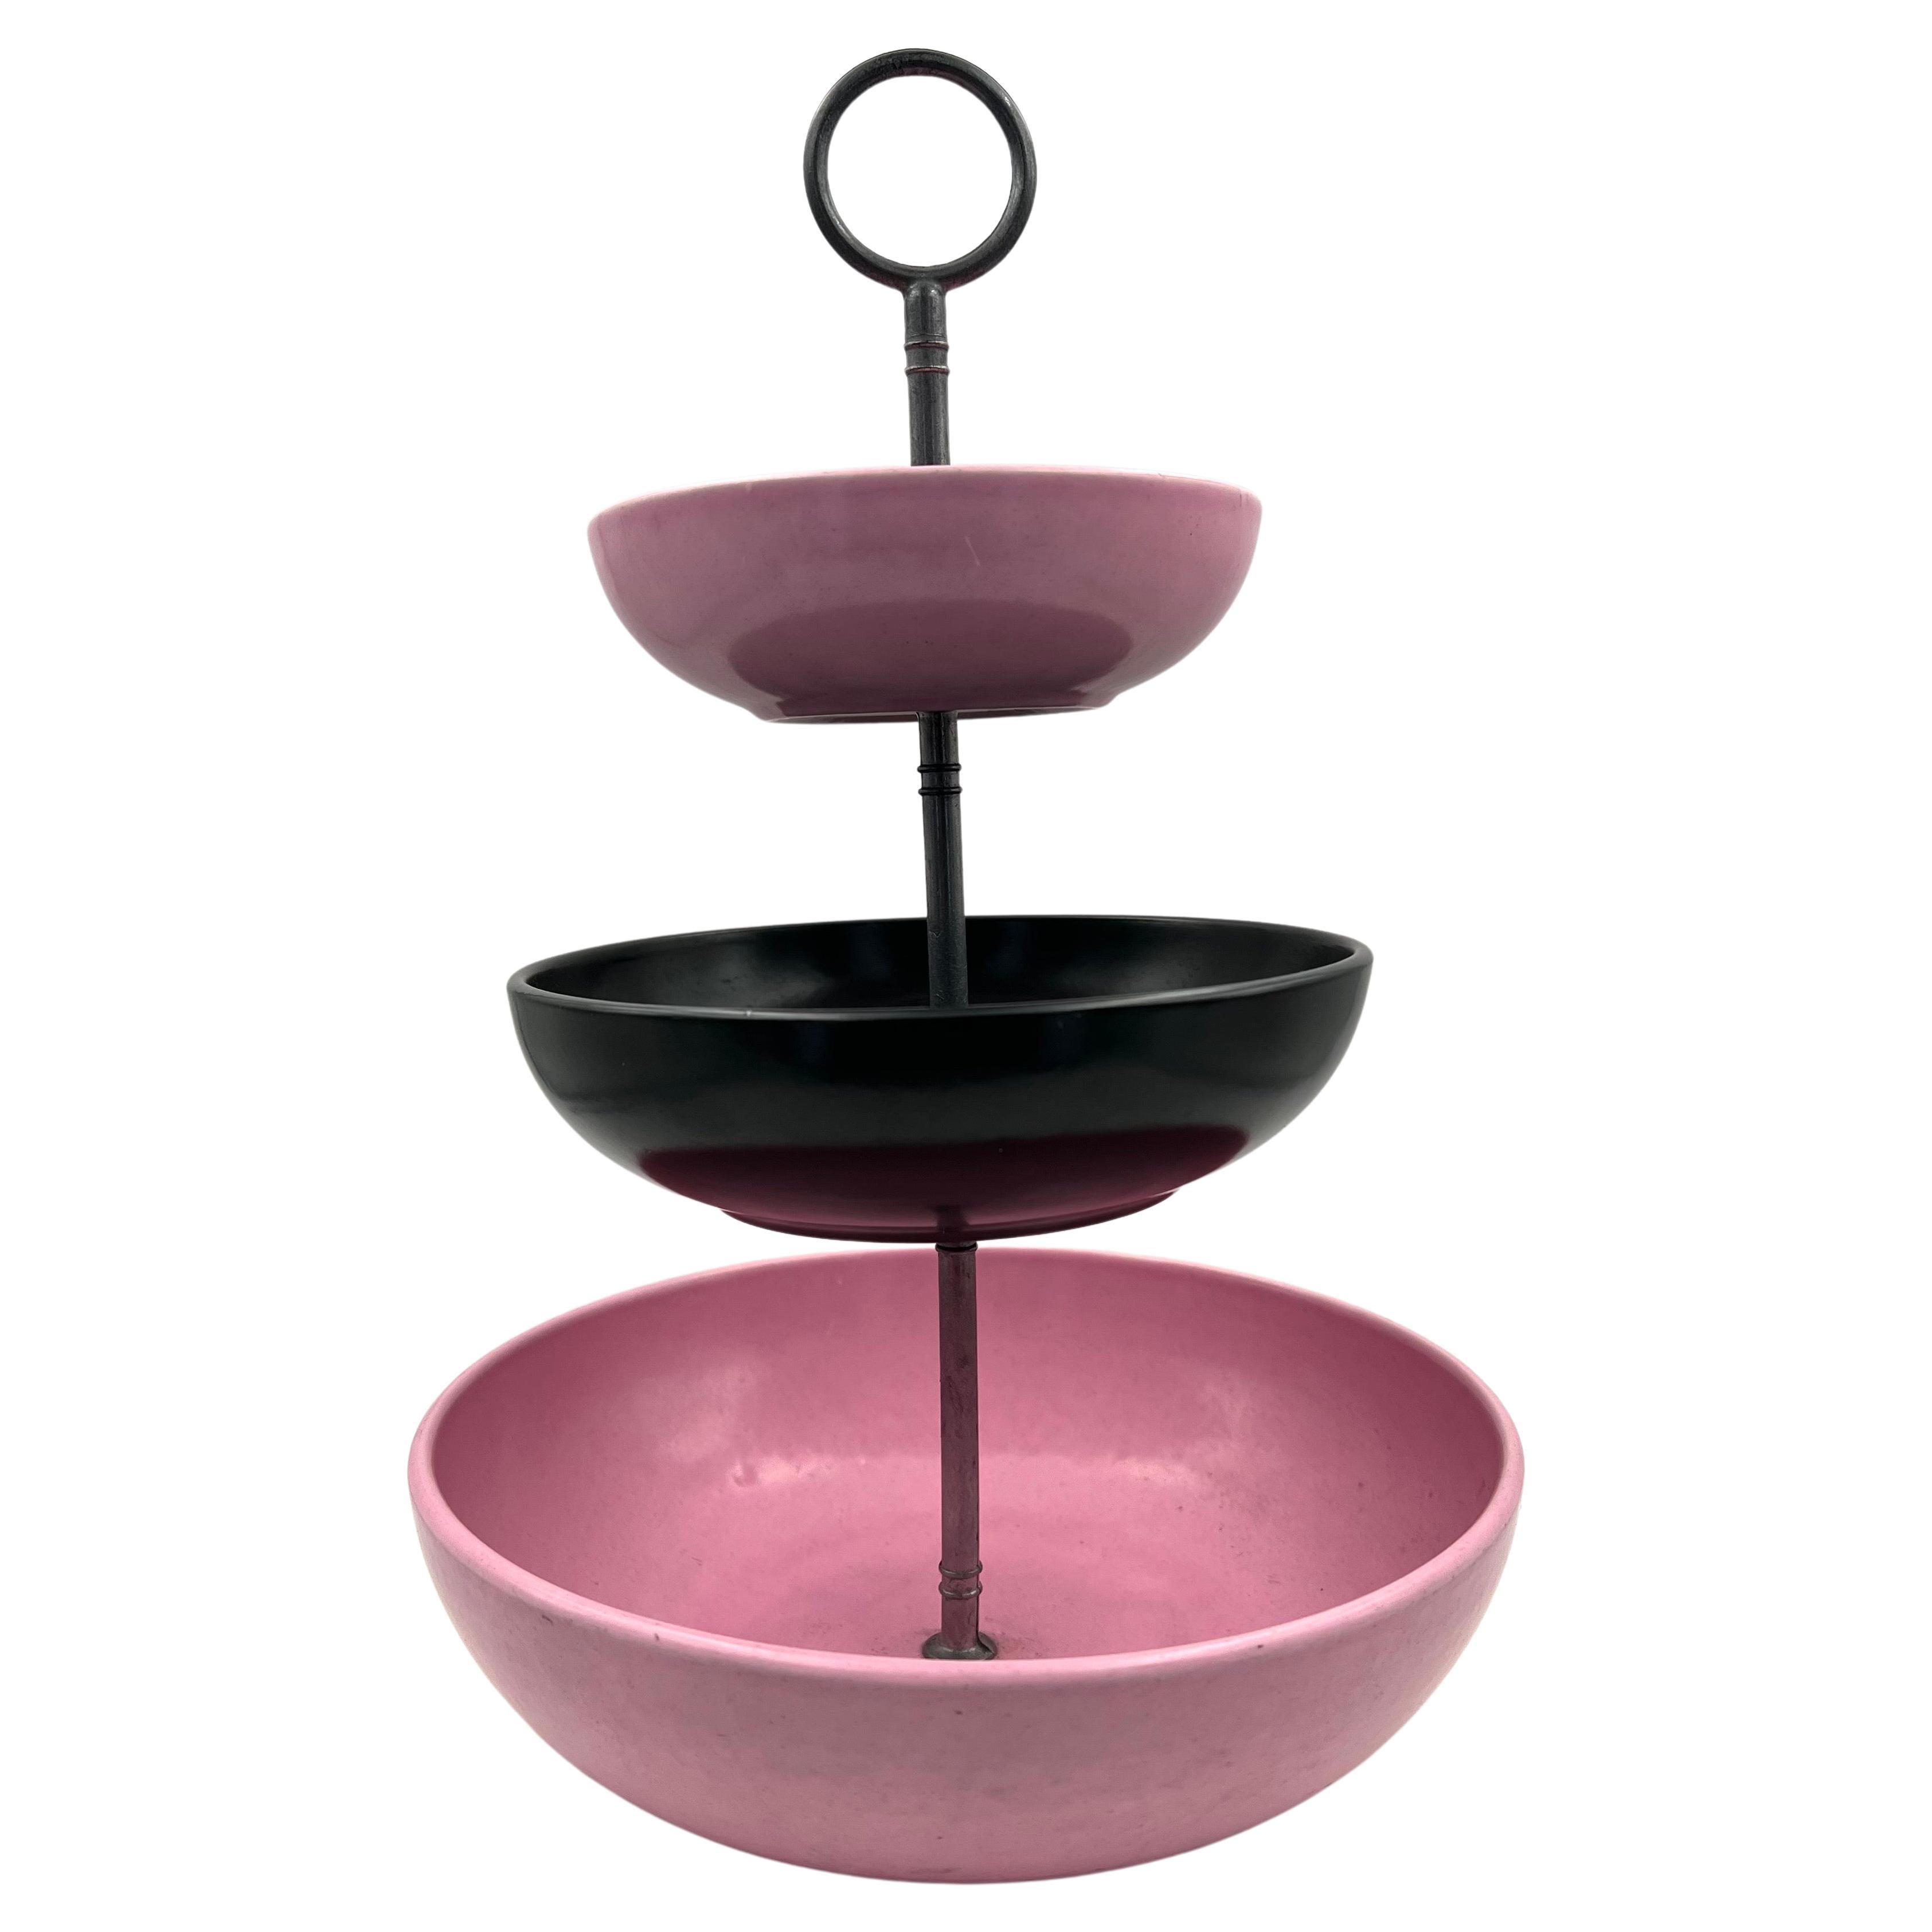 Beautiful 3-tier ceramic bowls in pink and black combo with a metal handle, classic atomic age piece in excellent condition.